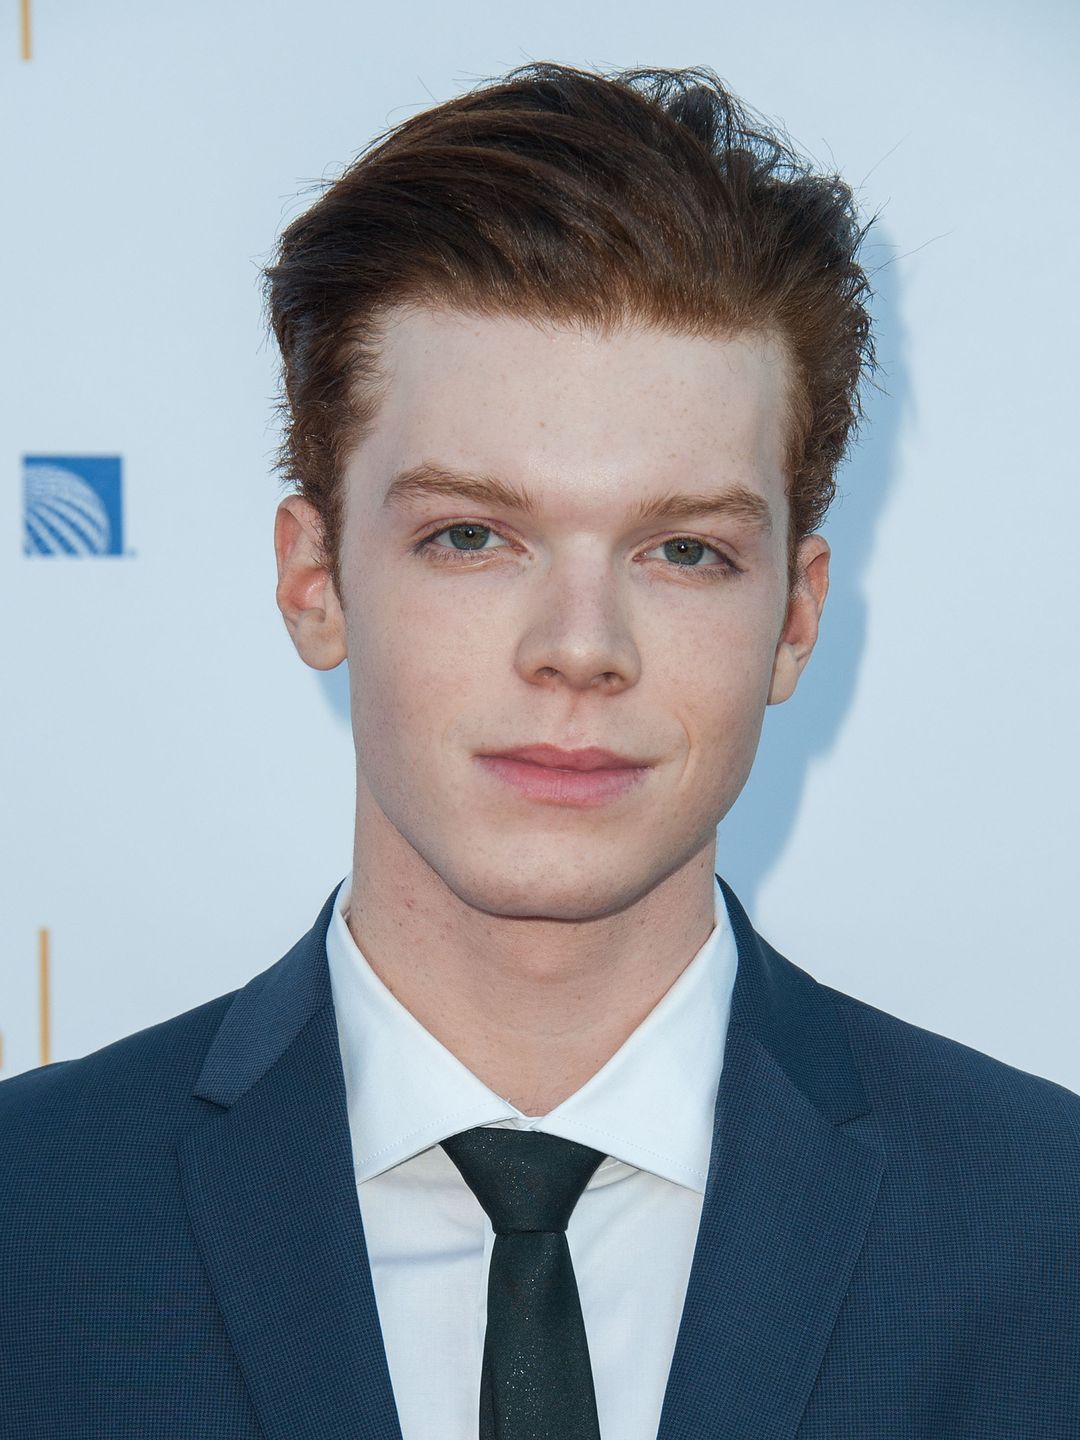 Cameron Monaghan interesting facts